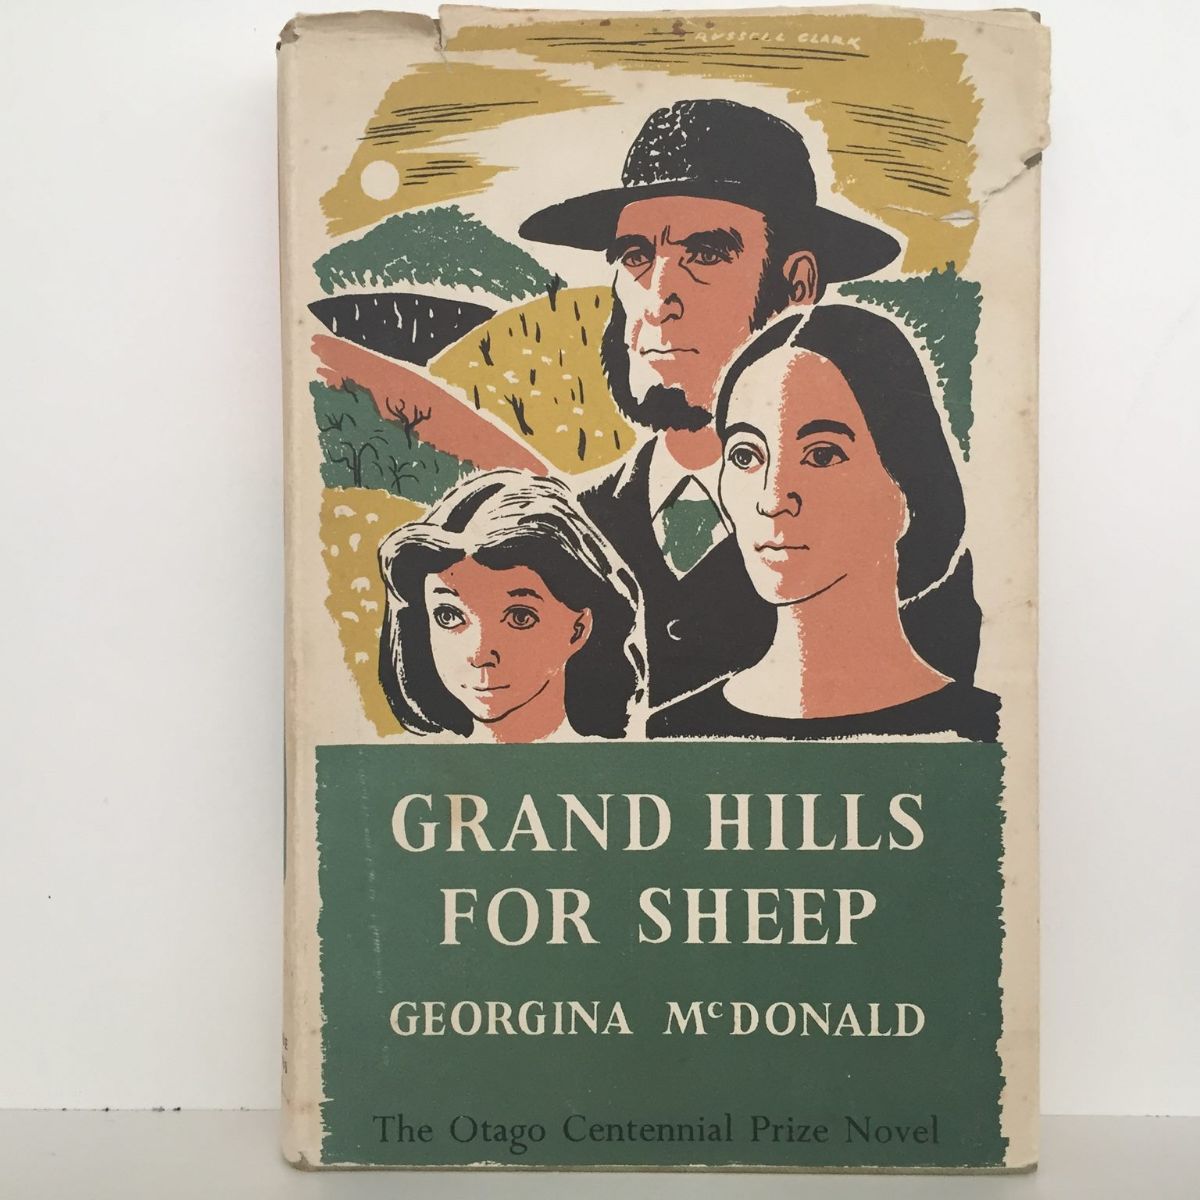 GRAND HILLS FOR SHEEP